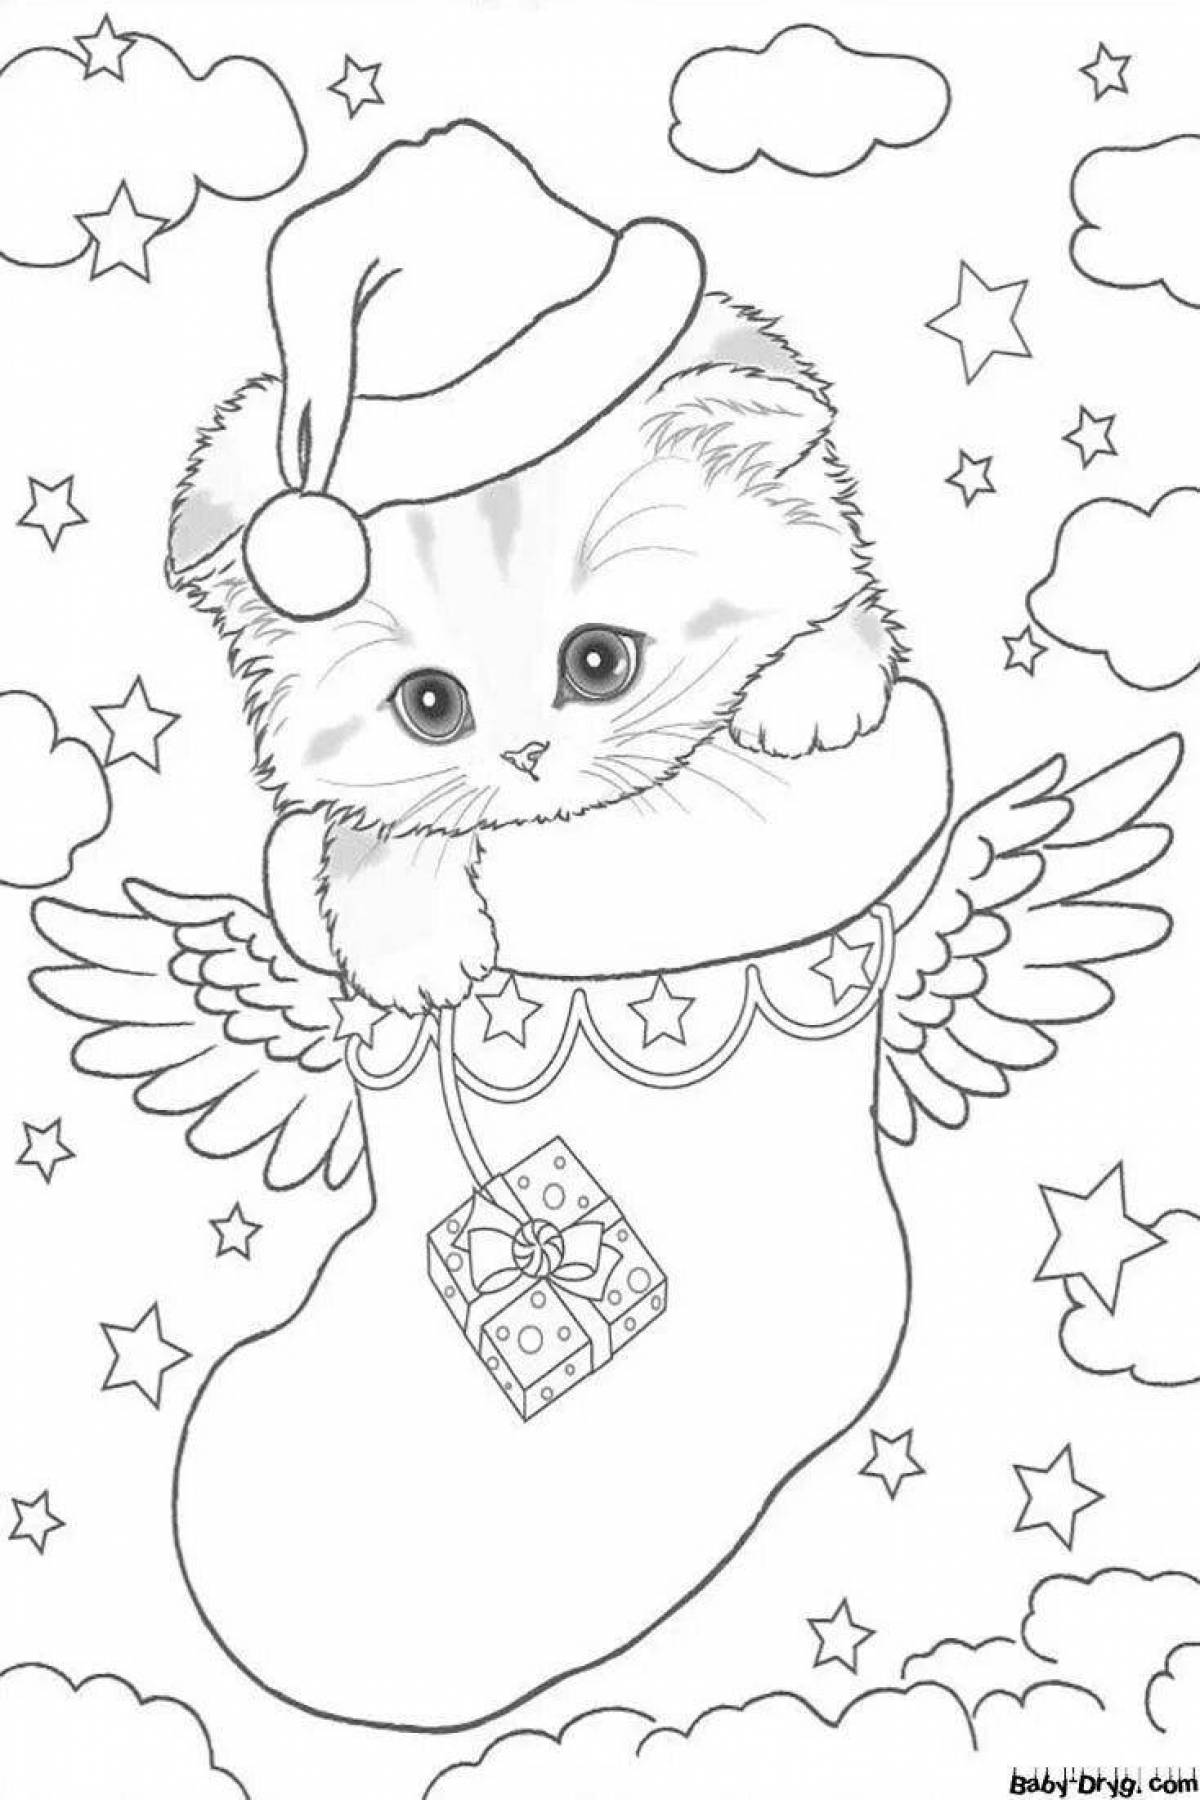 Festive year of the cat coloring book